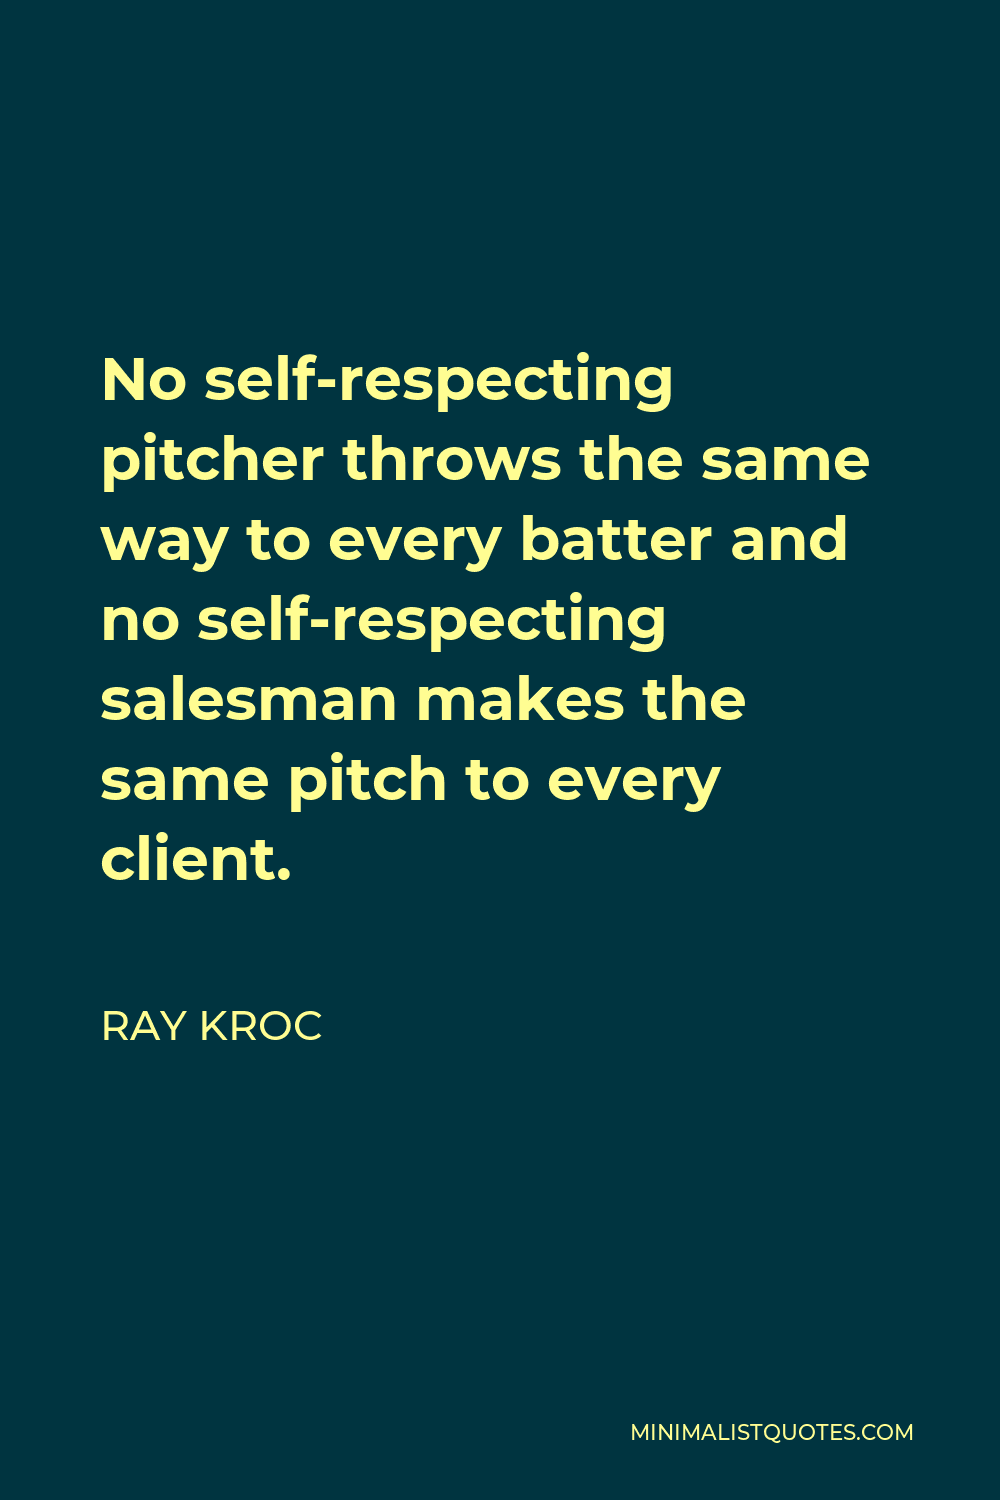 Ray Kroc Quote - No self-respecting pitcher throws the same way to every batter and no self-respecting salesman makes the same pitch to every client.